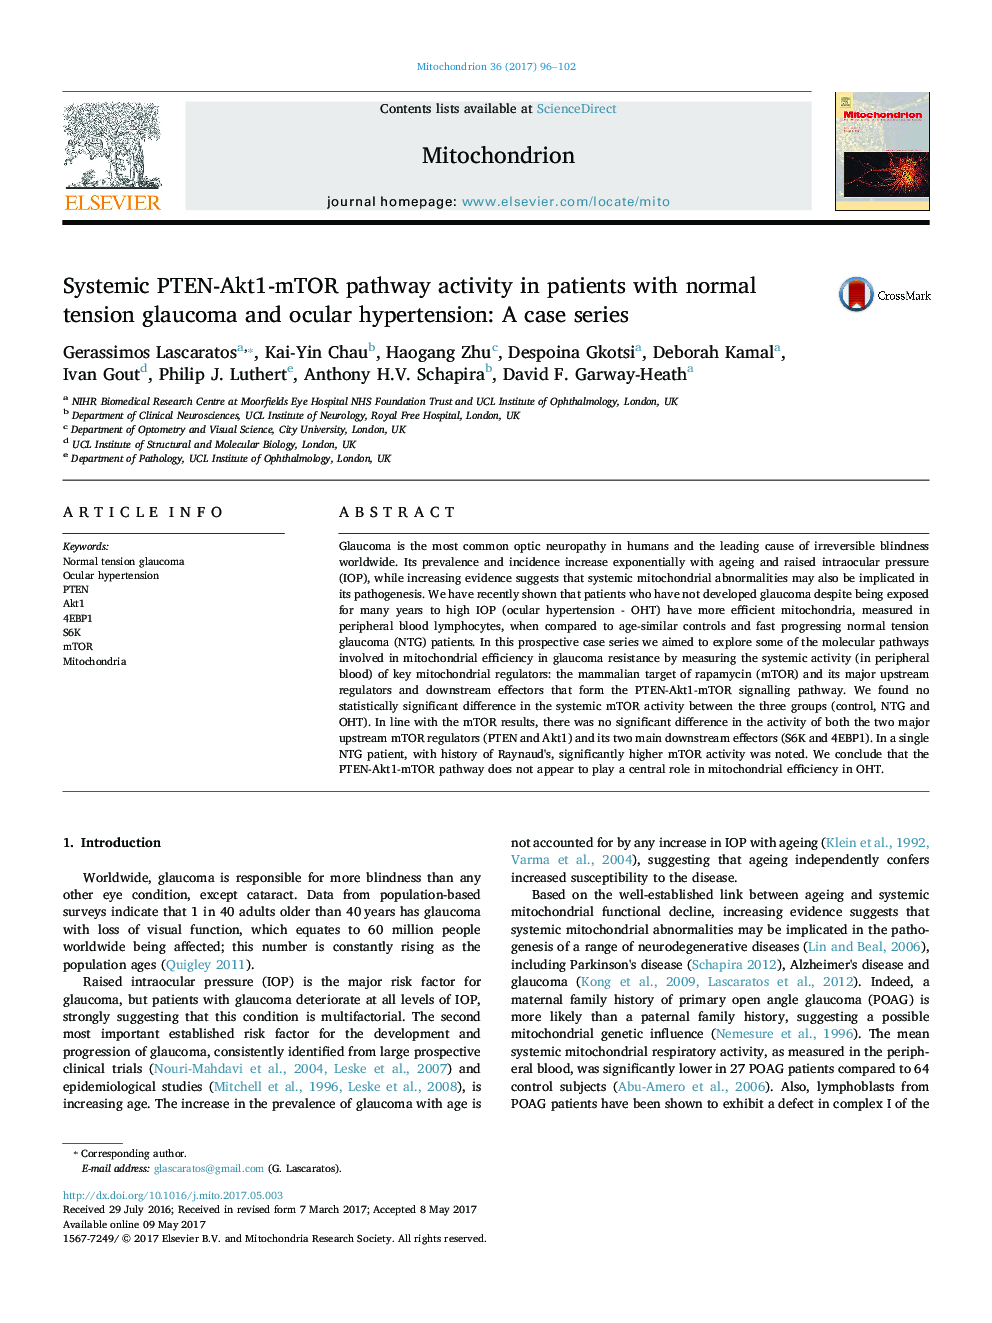 Systemic PTEN-Akt1-mTOR pathway activity in patients with normal tension glaucoma and ocular hypertension: A case series